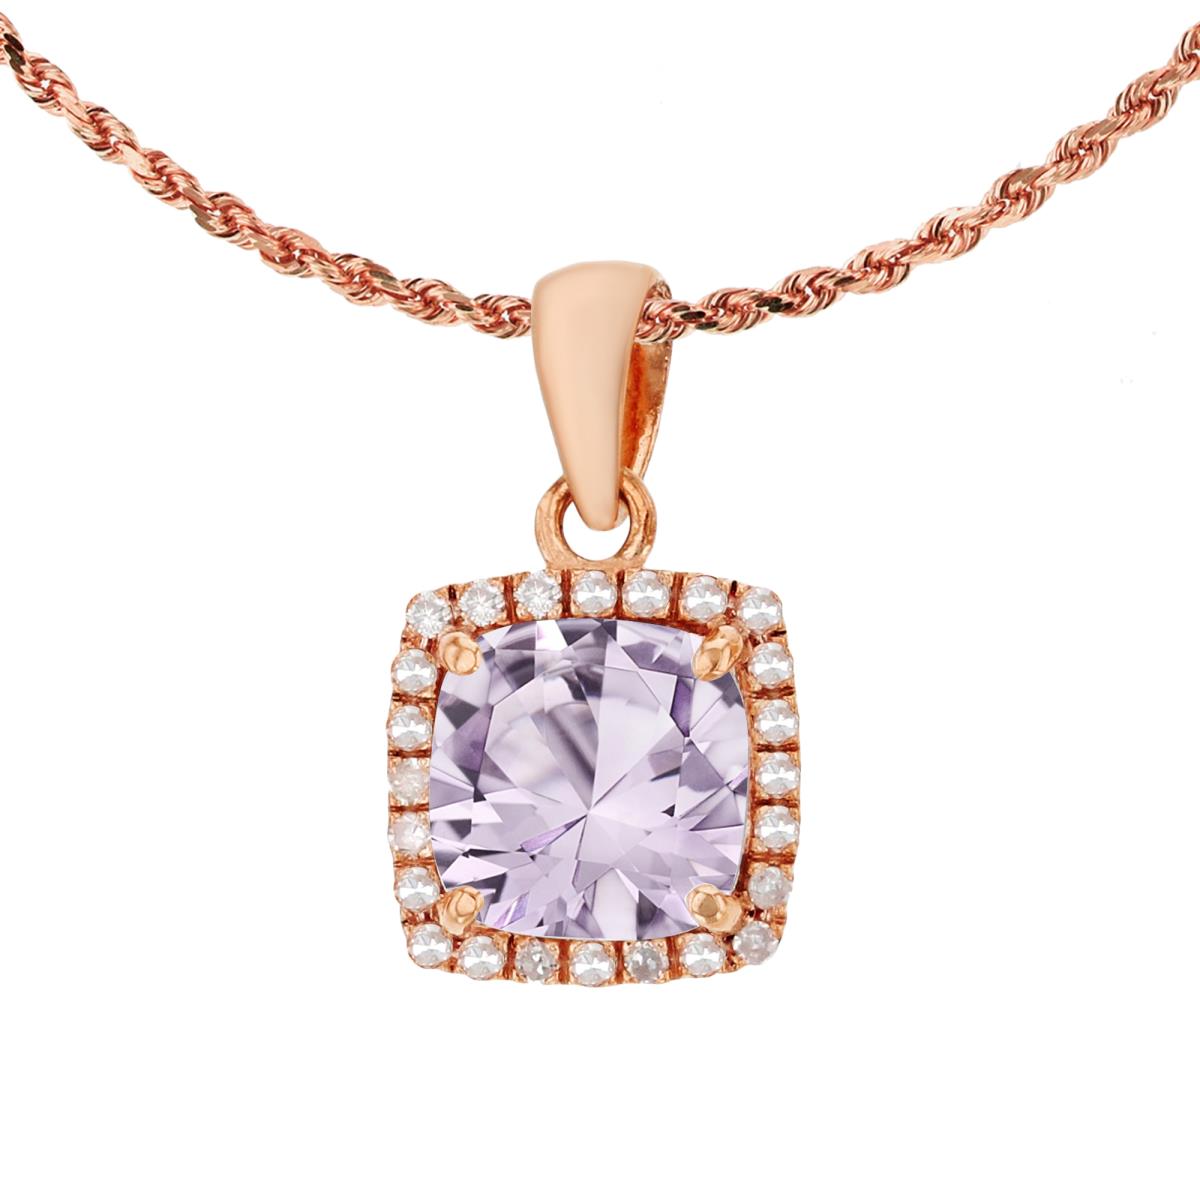 10K Rose Gold 7mm Cushion Rose De France & 0.12 CTTW Diamond Halo 18" Rope Chain Necklace